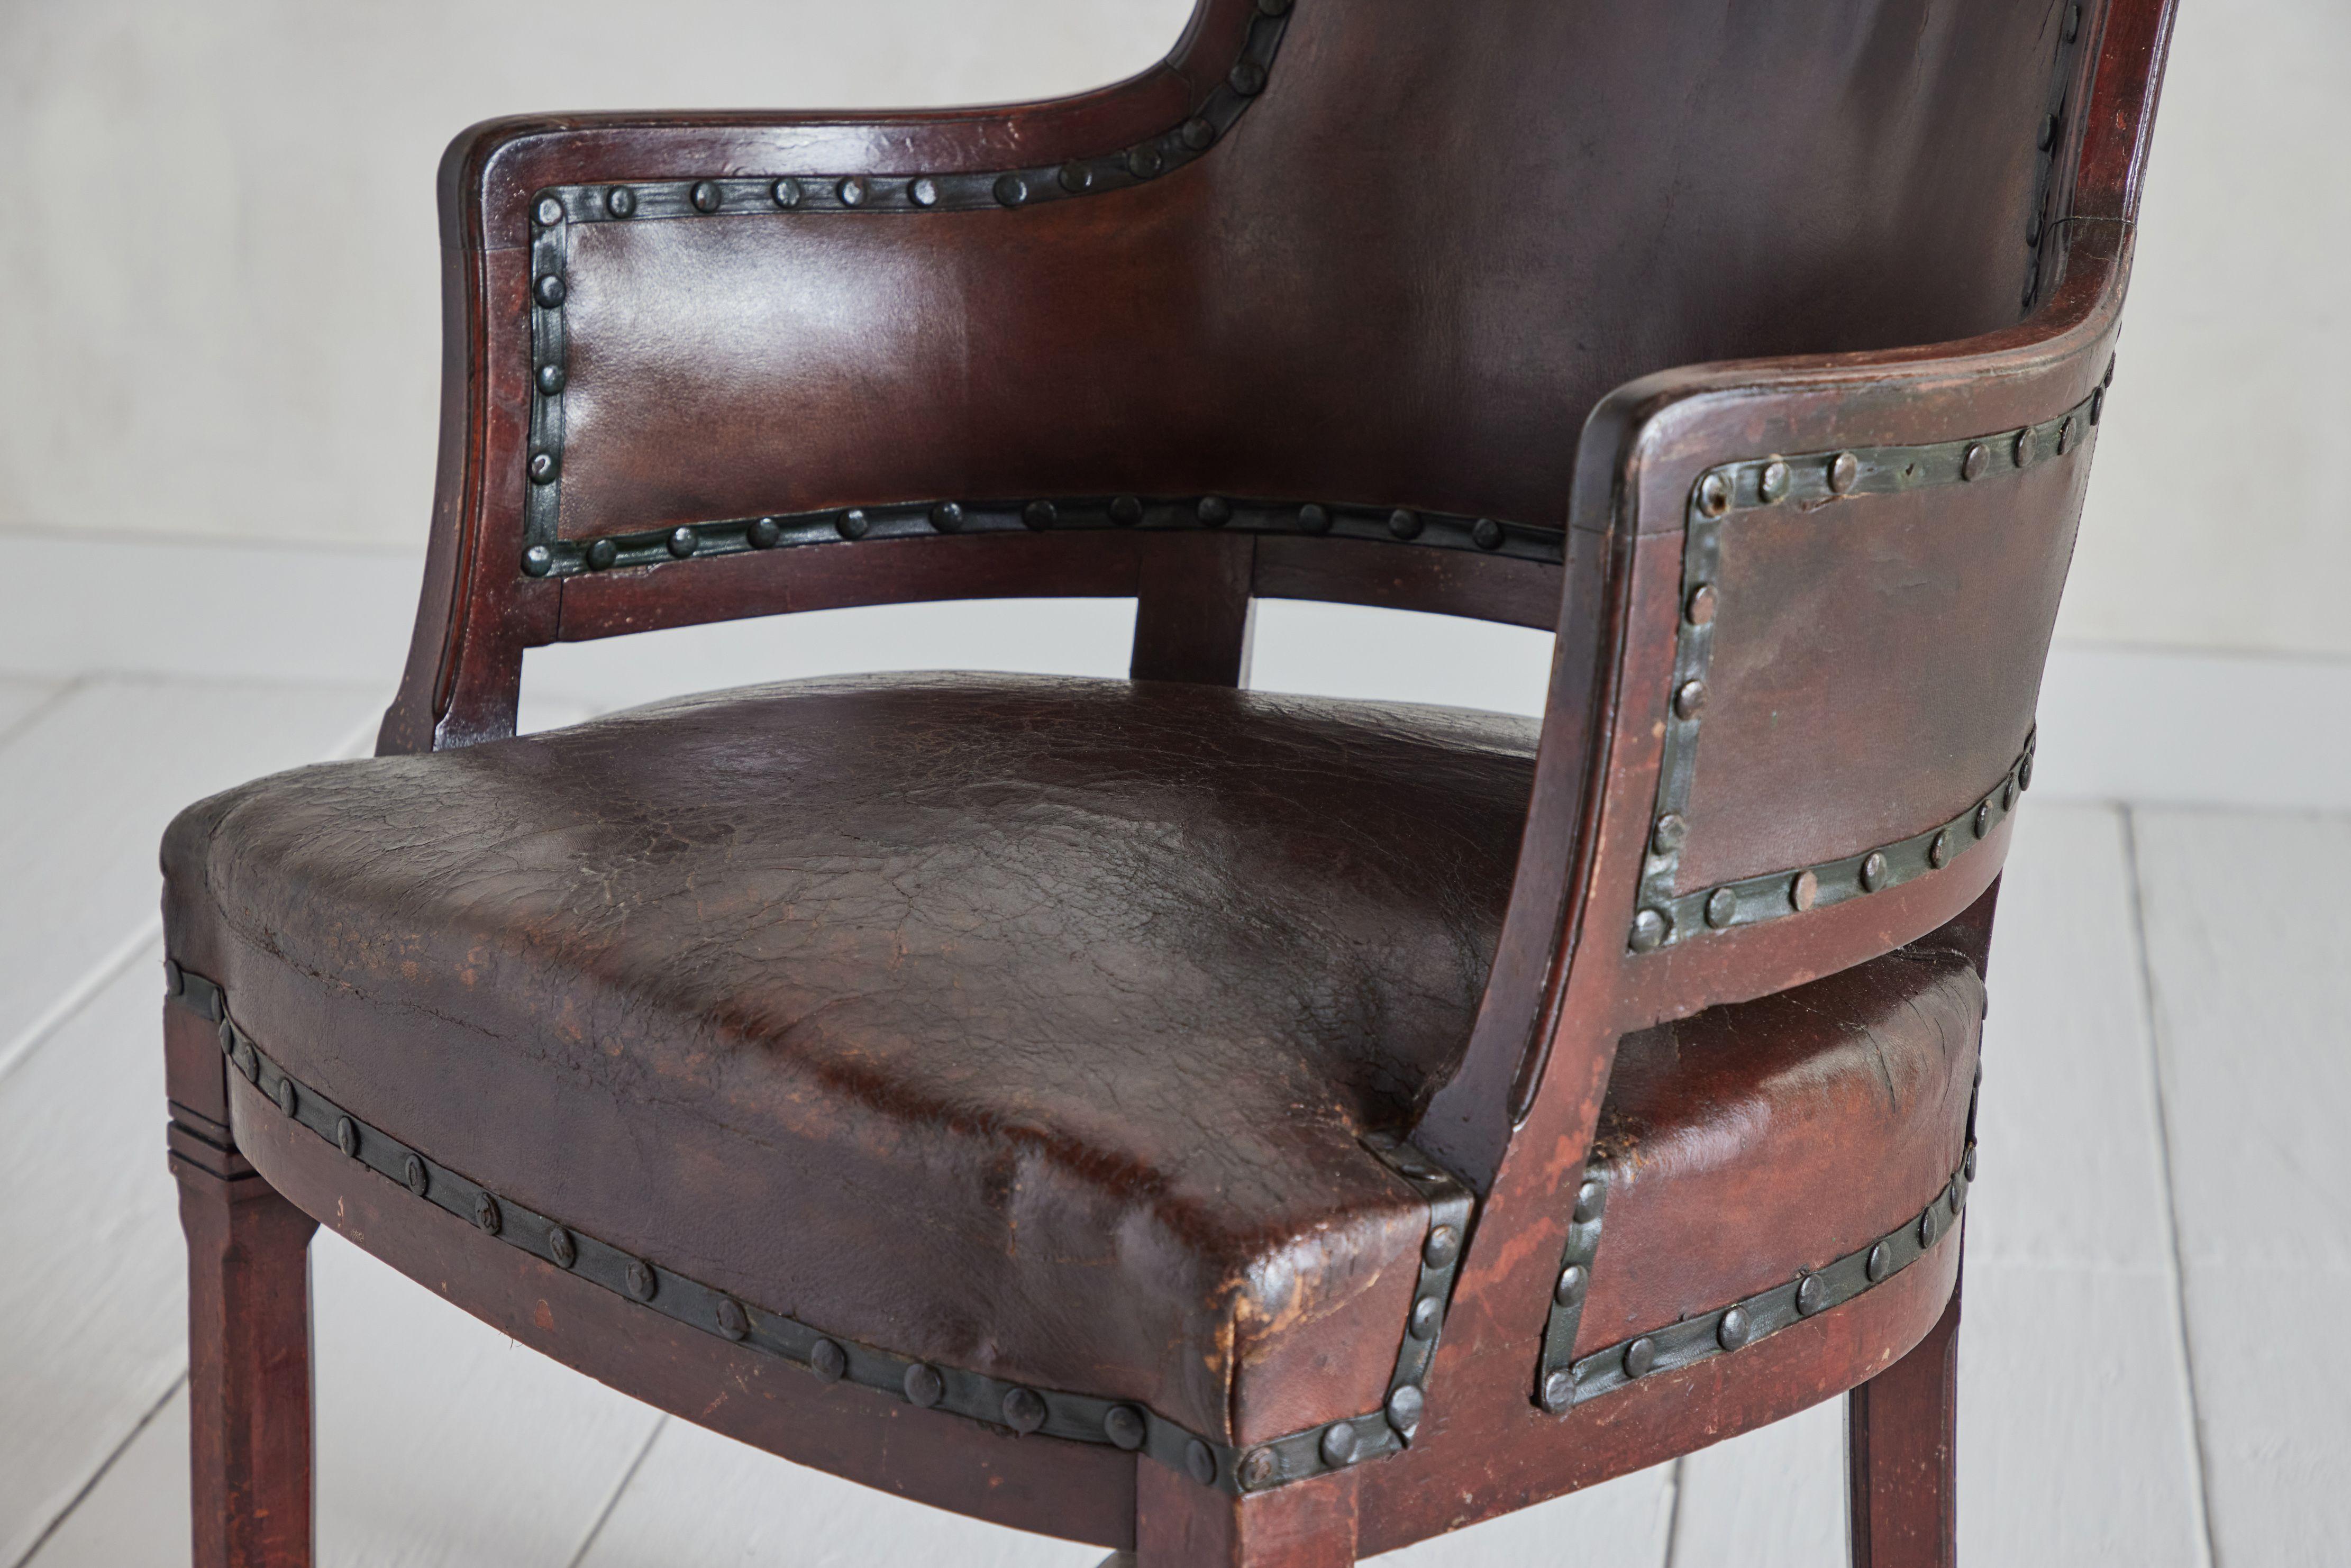 Pair of vintage leather pull up chairs made from wood and leather with nail head detailing. Leather has visible wear that is consistent with age and use. France circa 1930. 

Good vintage condition. Leather has visible wear that is consistent with